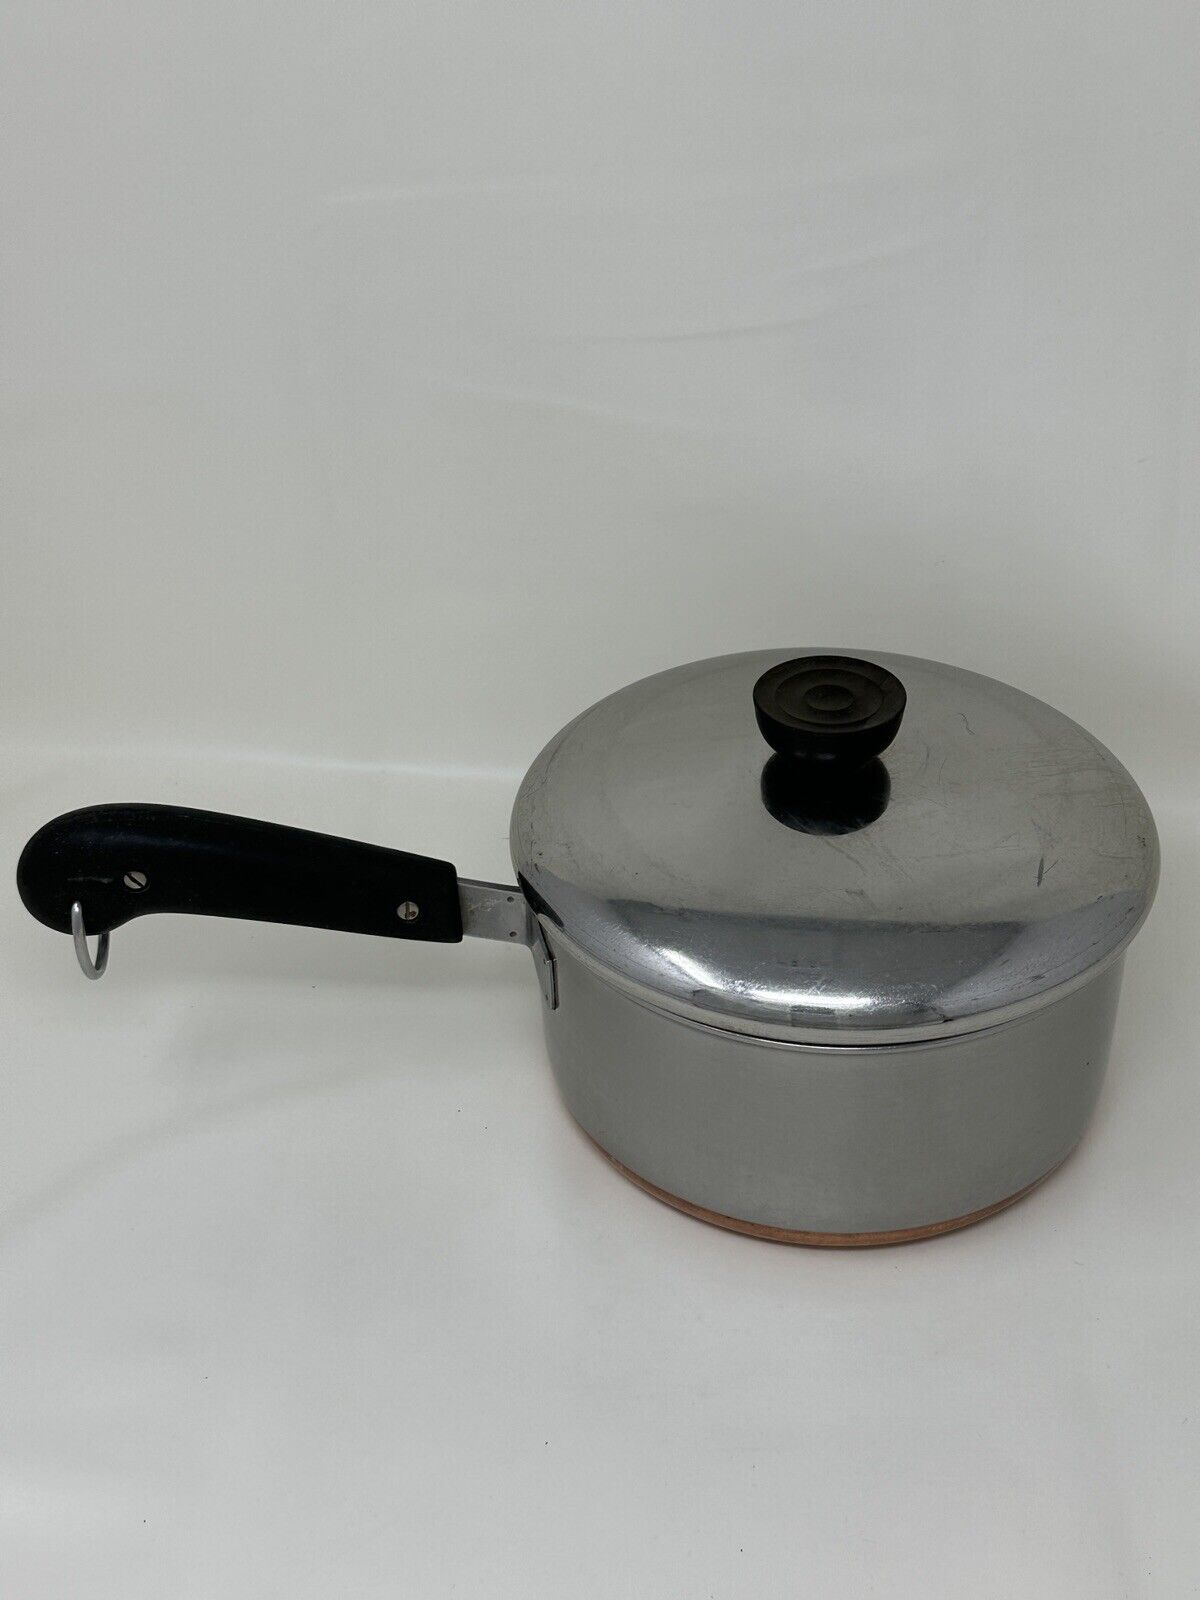 Vintage Revere Ware Stainless Steel Copper Bottom 2 Qt Sauce Pan With Lid